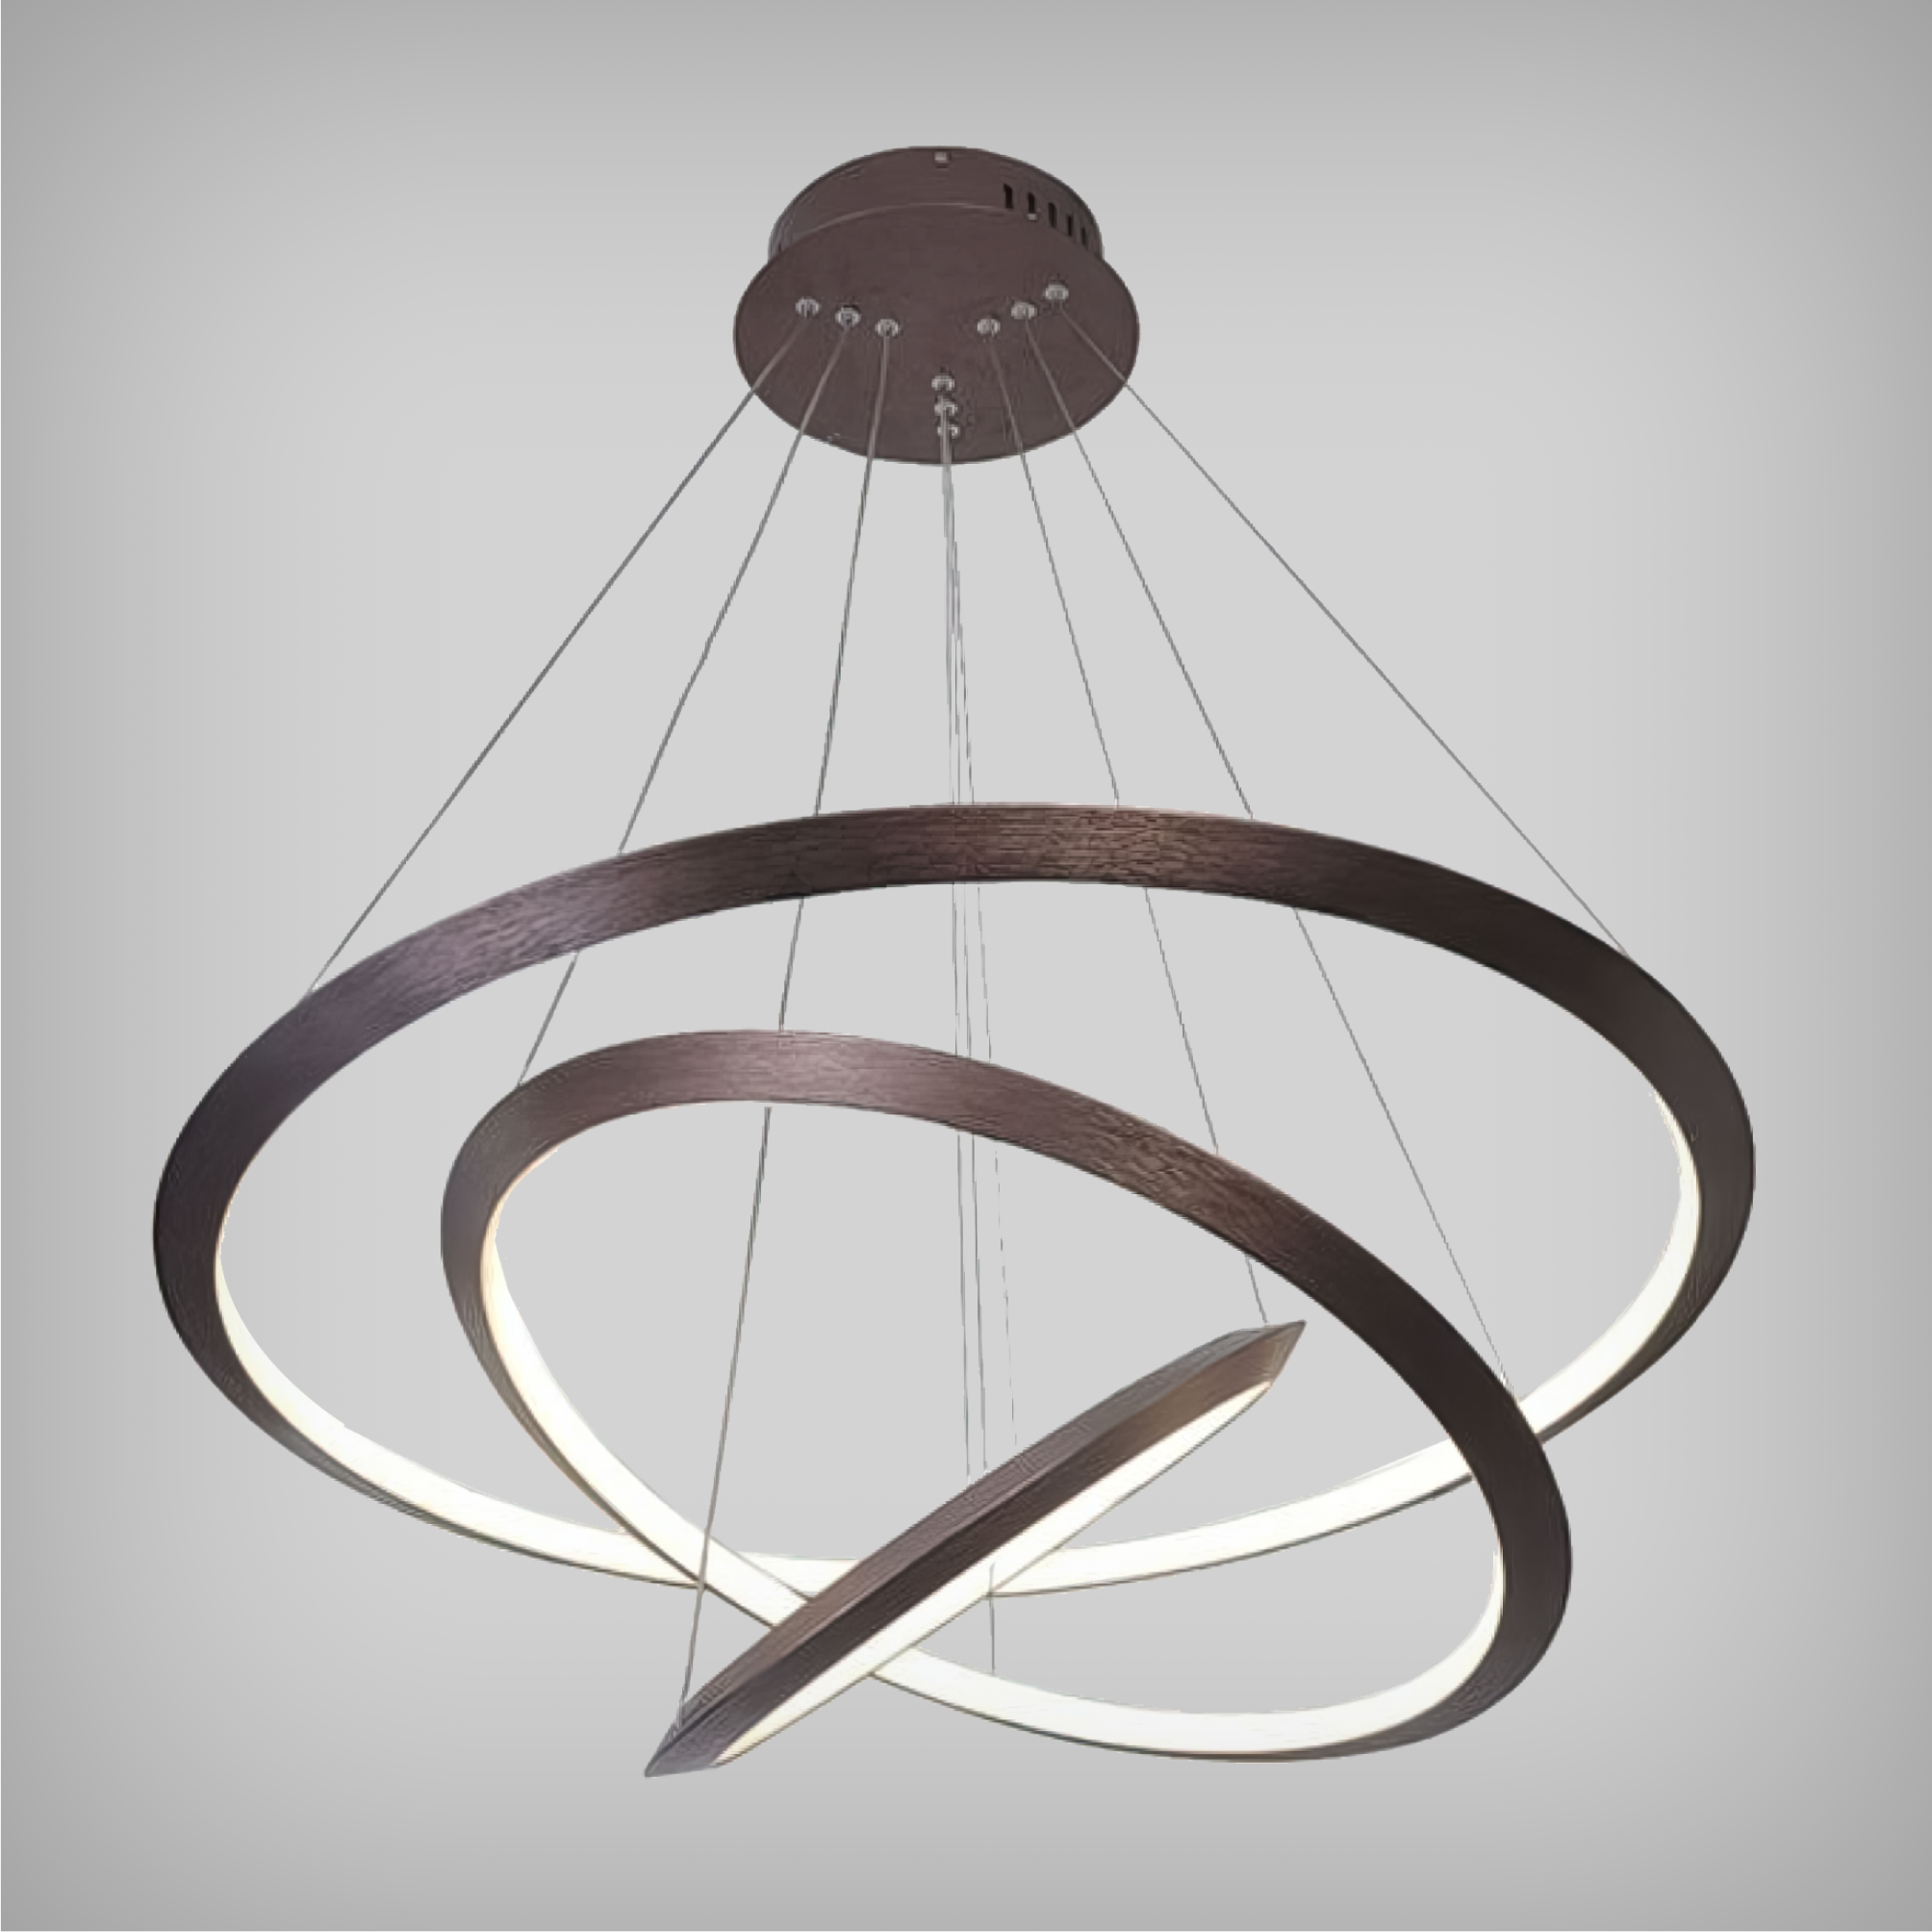 3-Tier Suspended Architectural LED Ring Chandelier